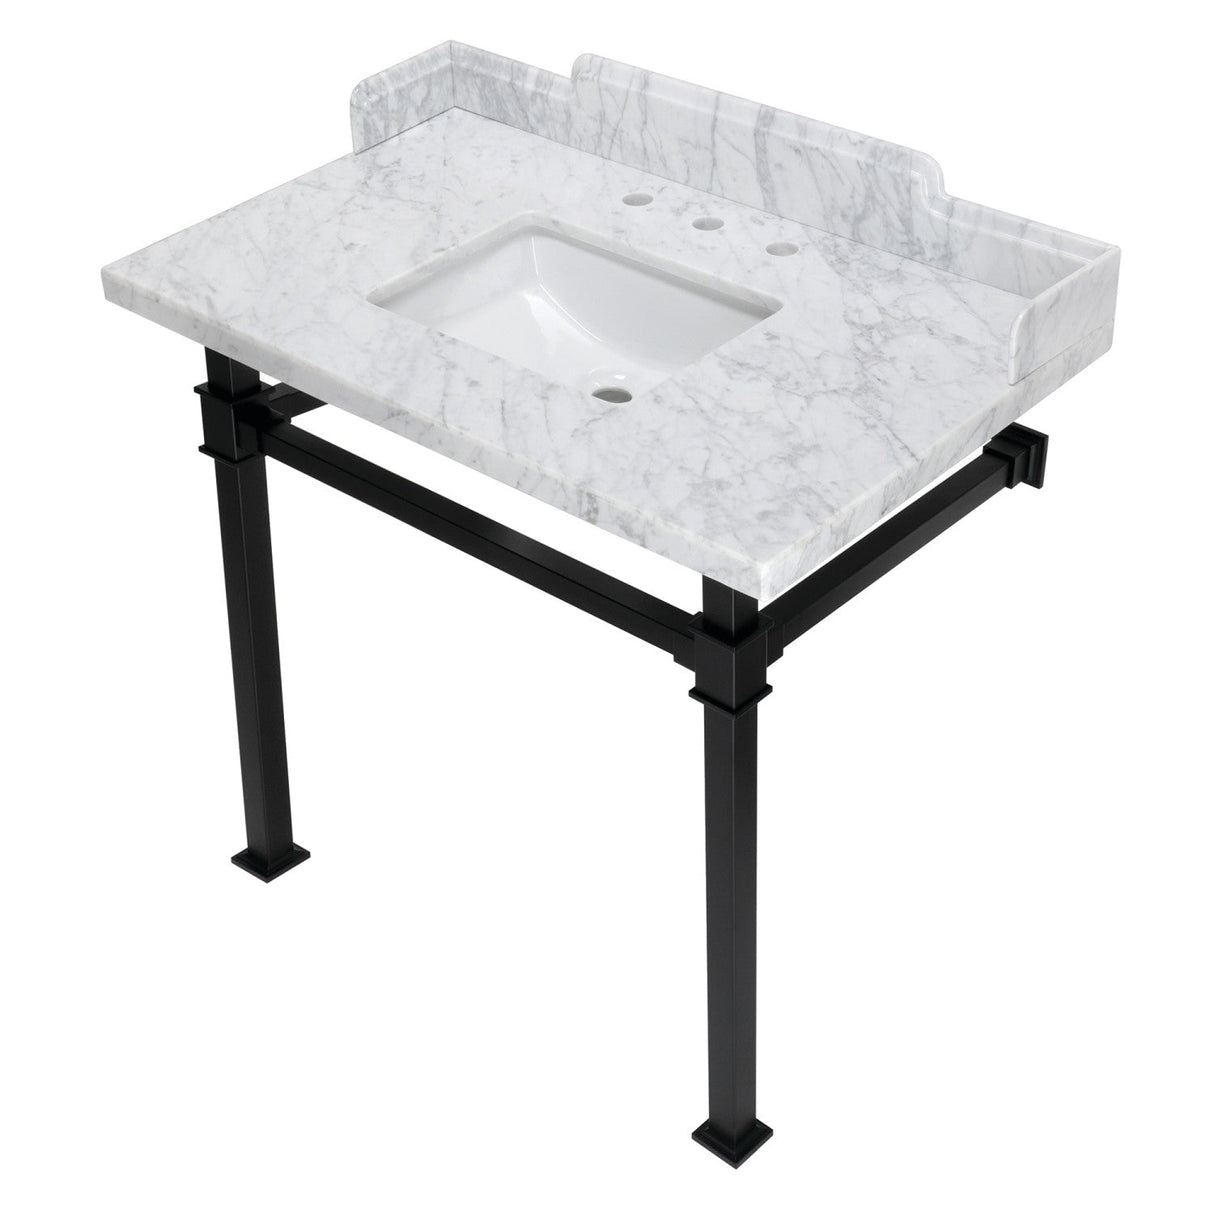 Fauceture LMS36MSQ0 36-Inch Carrara Marble Console Sink with Stainless Steel Legs, Marble White/Matte Black